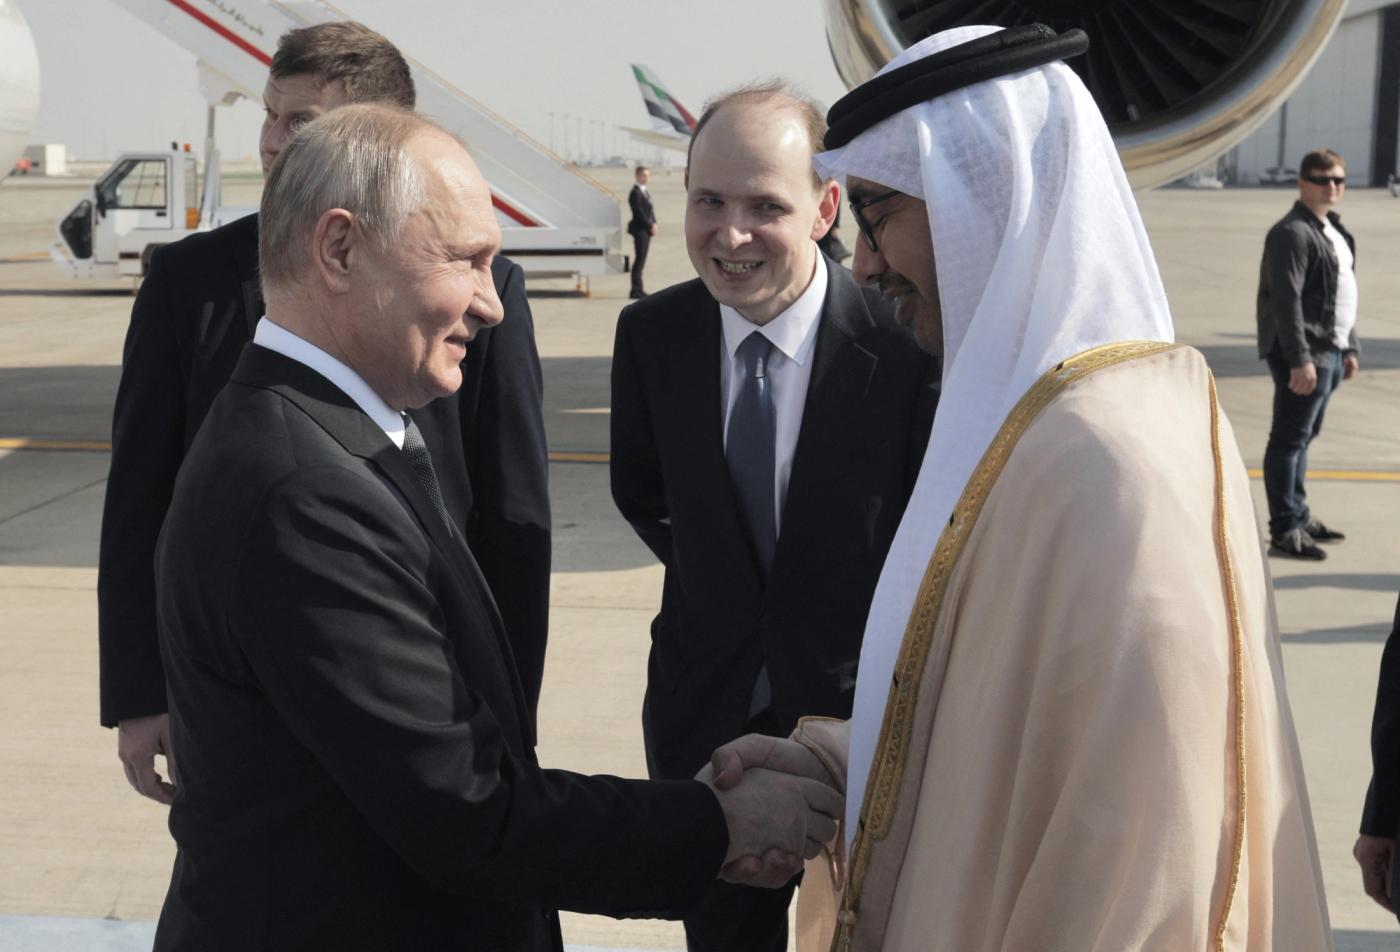 Russian President Vladimir Putin is welcomed by Minister of Foreign Affairs of the United Arab Emirates Sheikh Abdullah bin Zayed bin Sultan Al Nahyan upon arrival at the Abu Dhabi International Airport, United Arab Emirates December 6, 2023. Sputnik/Andrey Gordeev/Pool via REUTERS